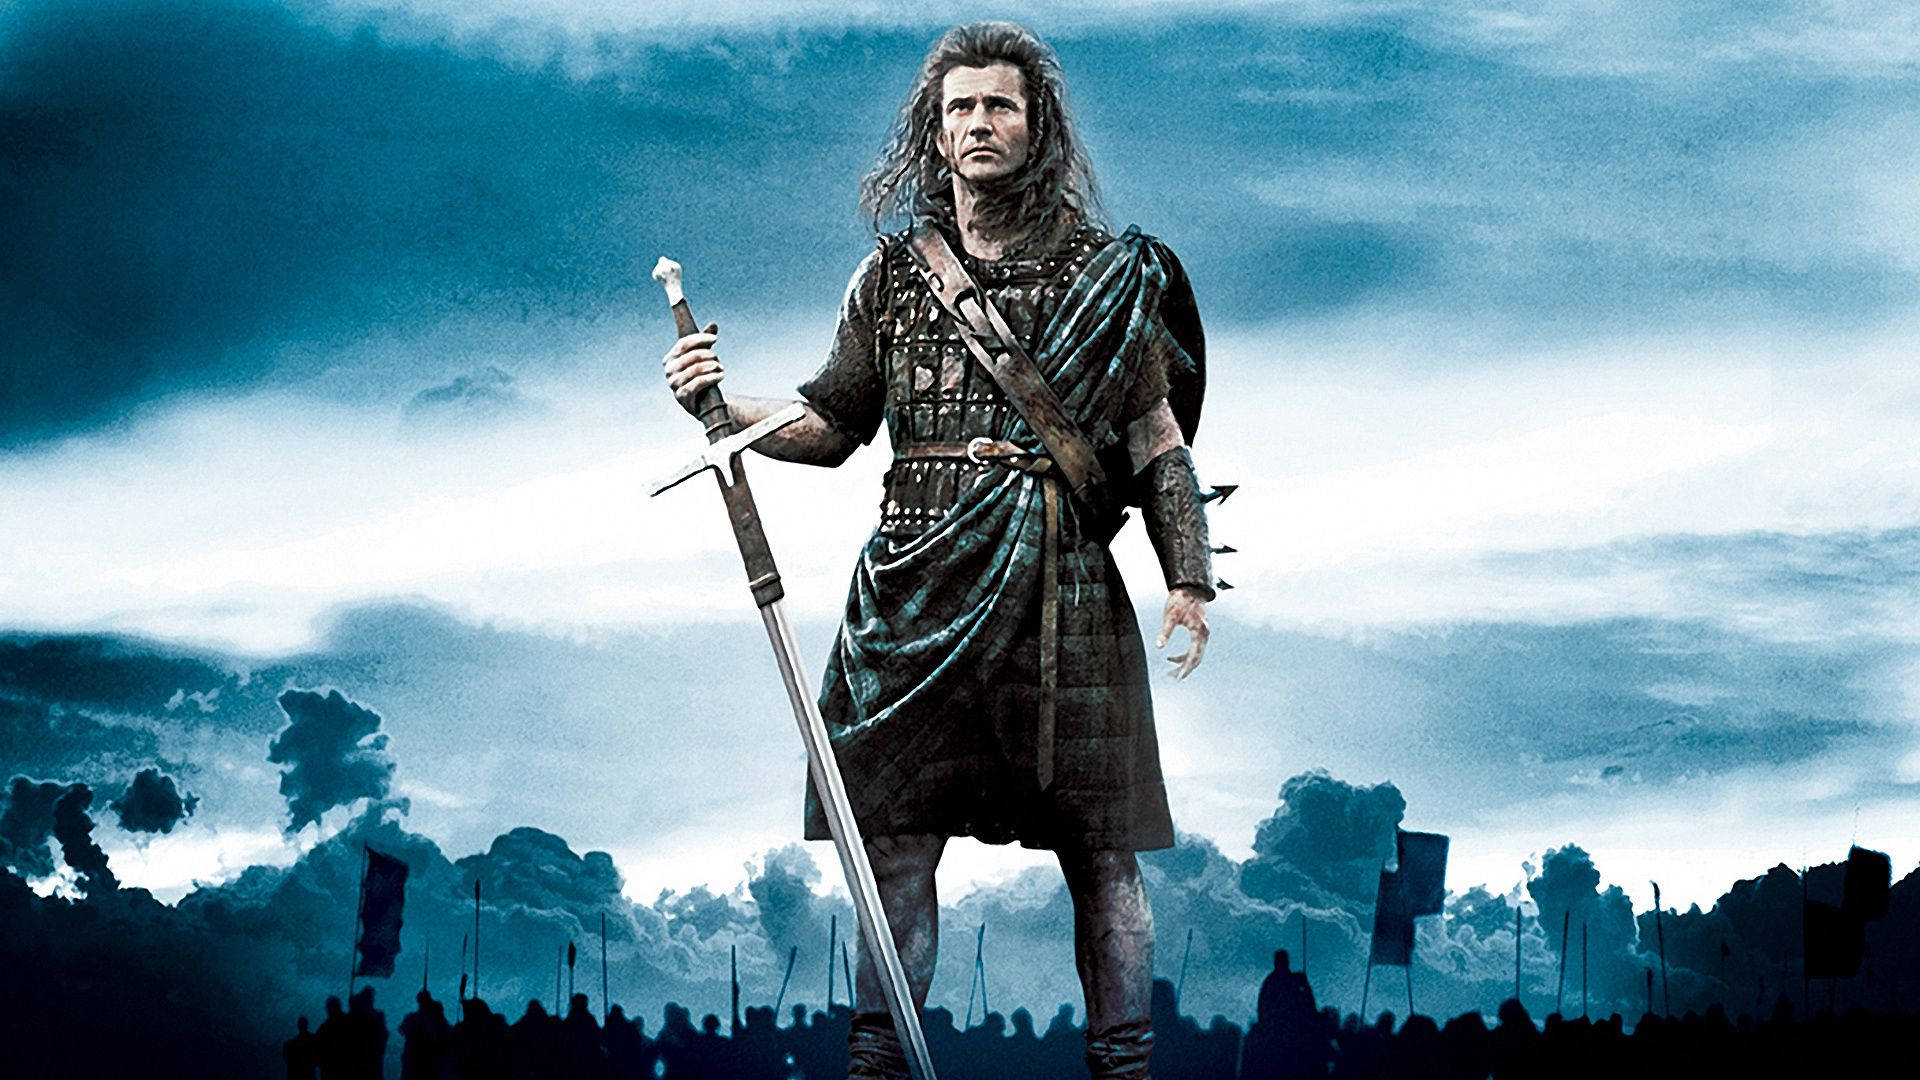 Mel Gibson As Warrior William Wallace